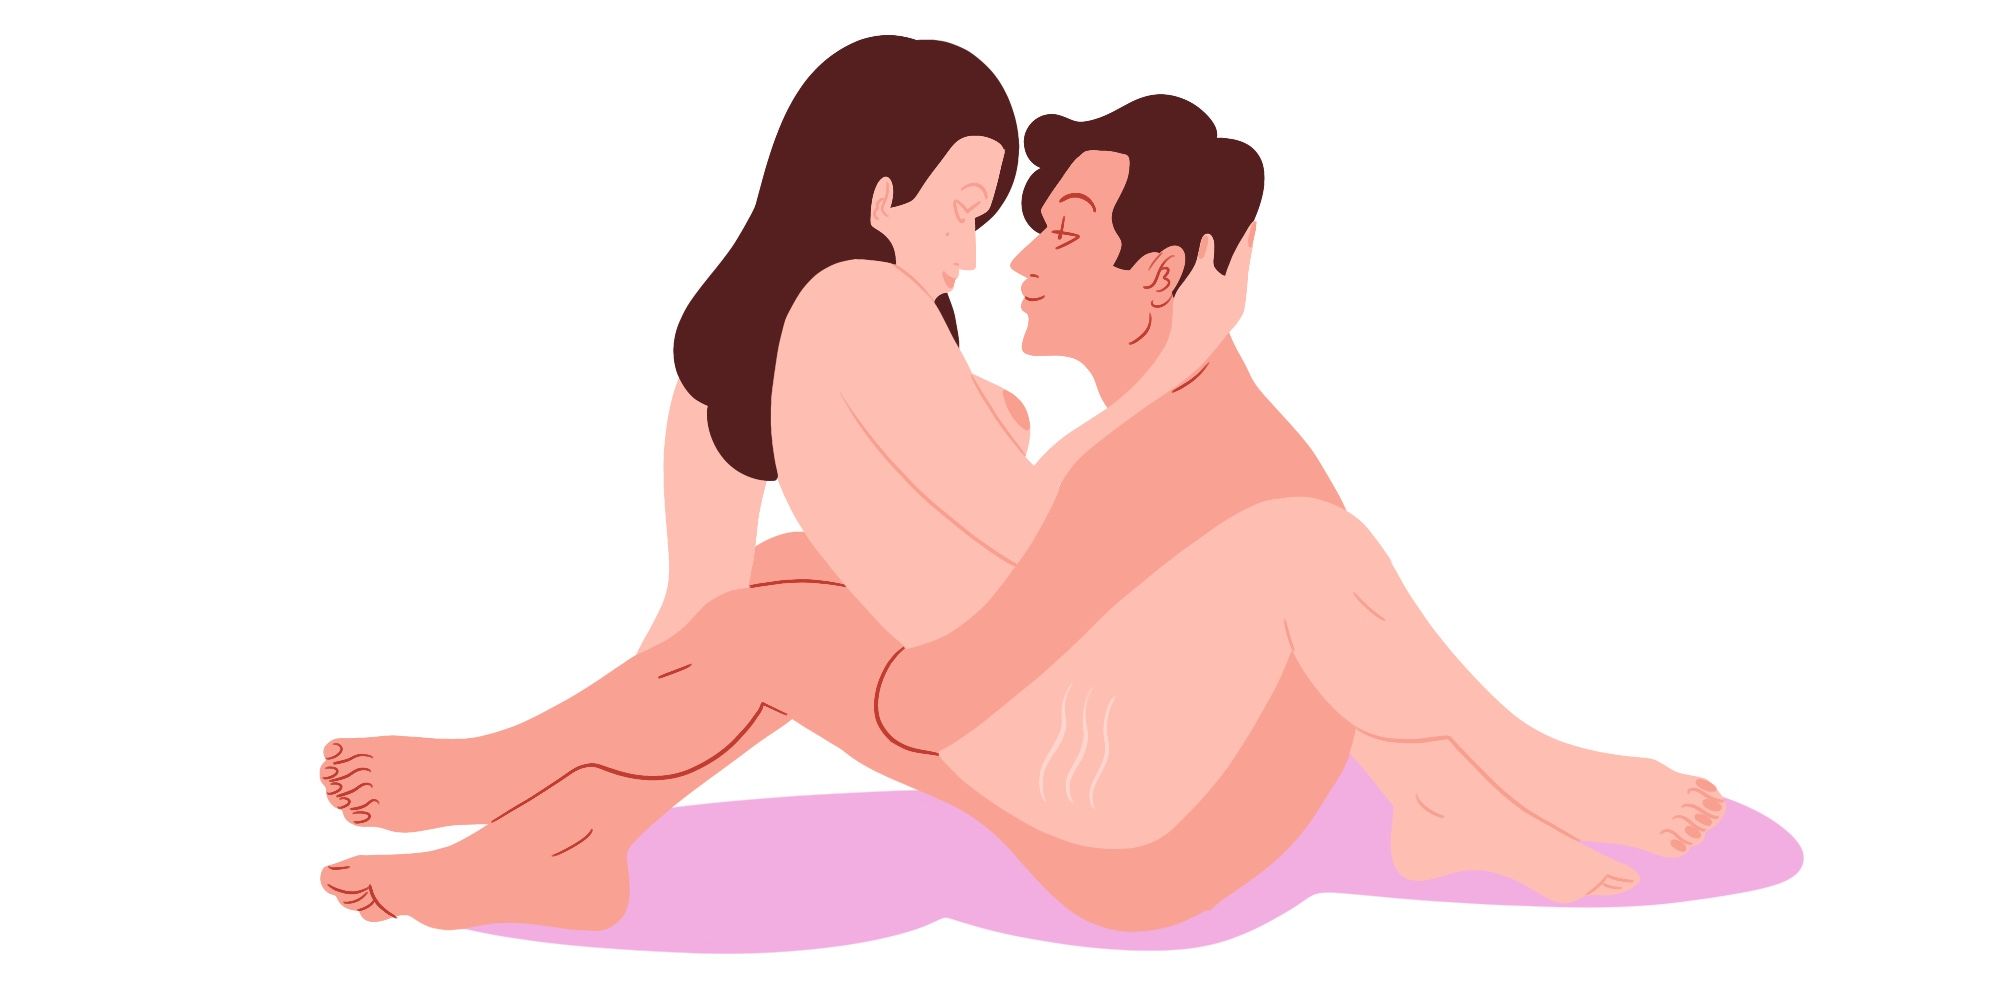 Best of All sex position video